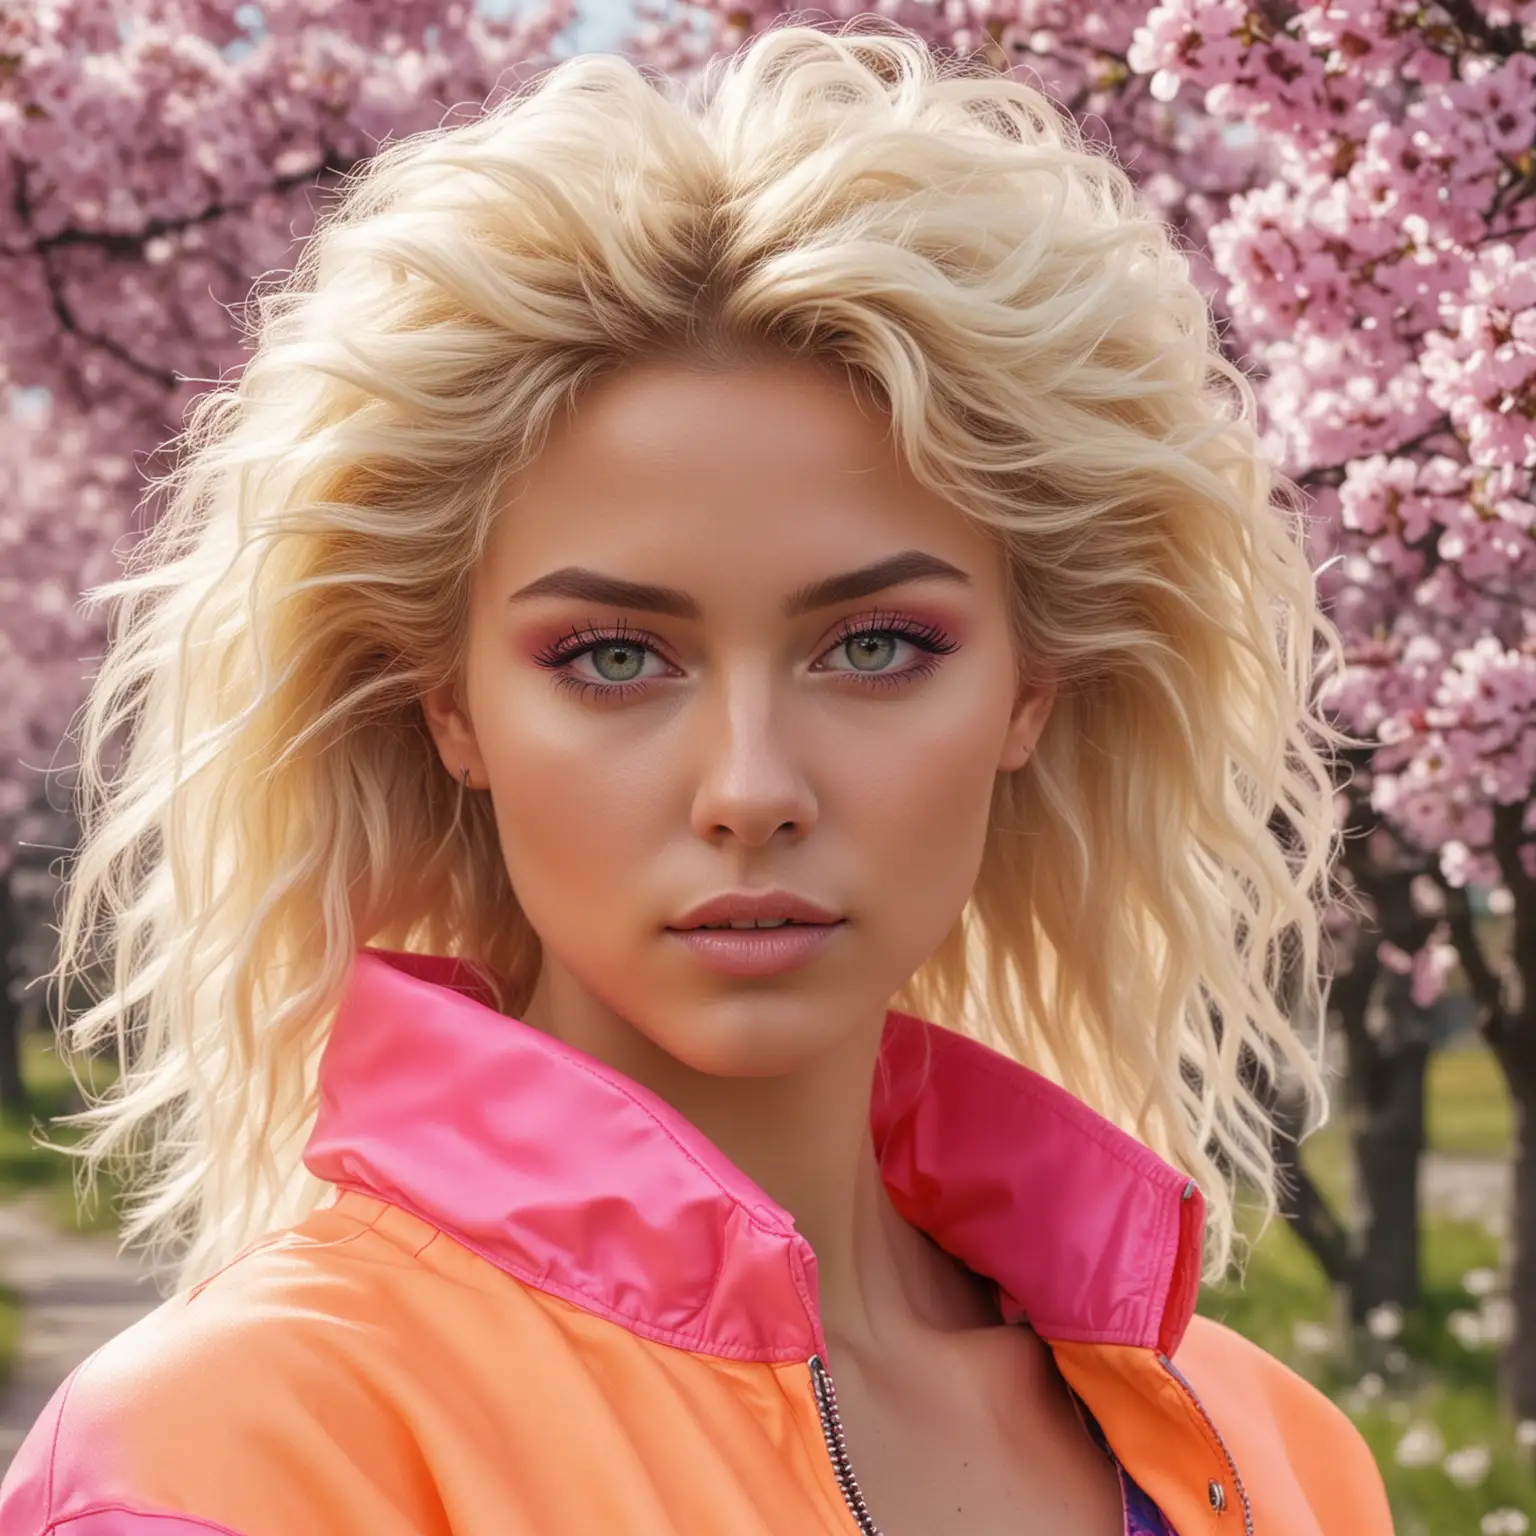 Neon Festival Style Vibrant Nordic Woman in Blossoming Spring Setting